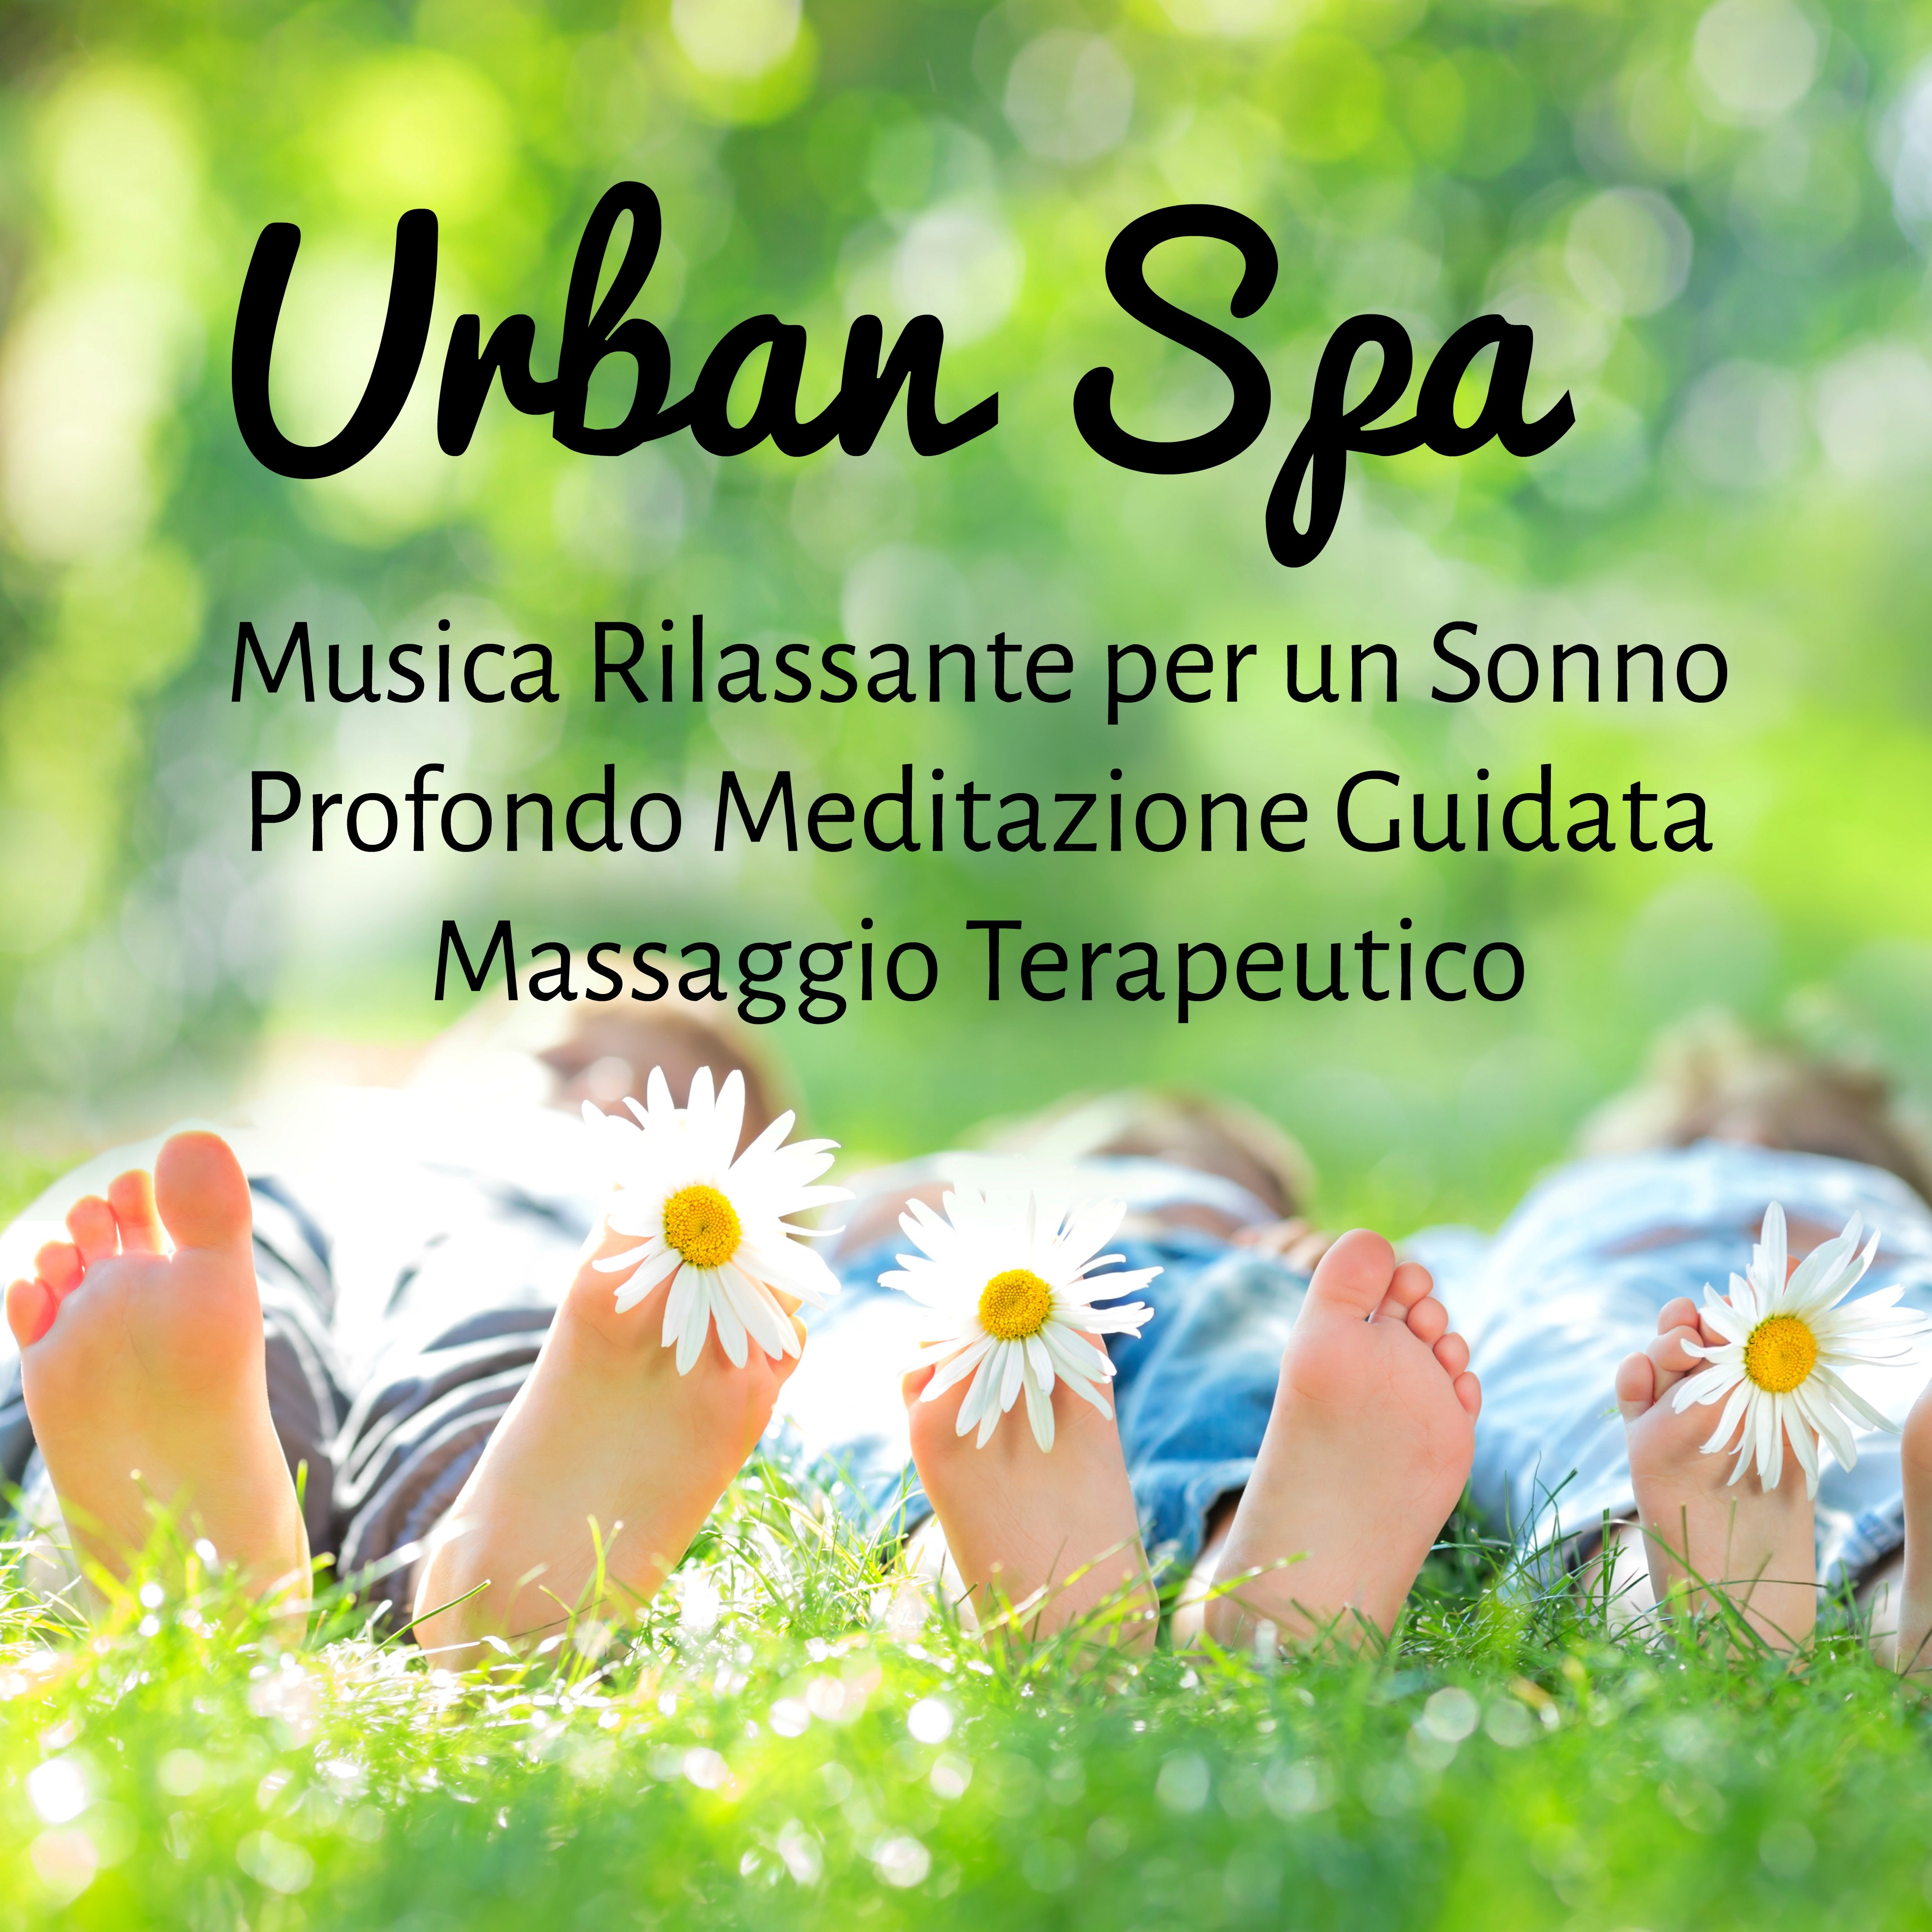 Urban Spa (Chill Out Music)